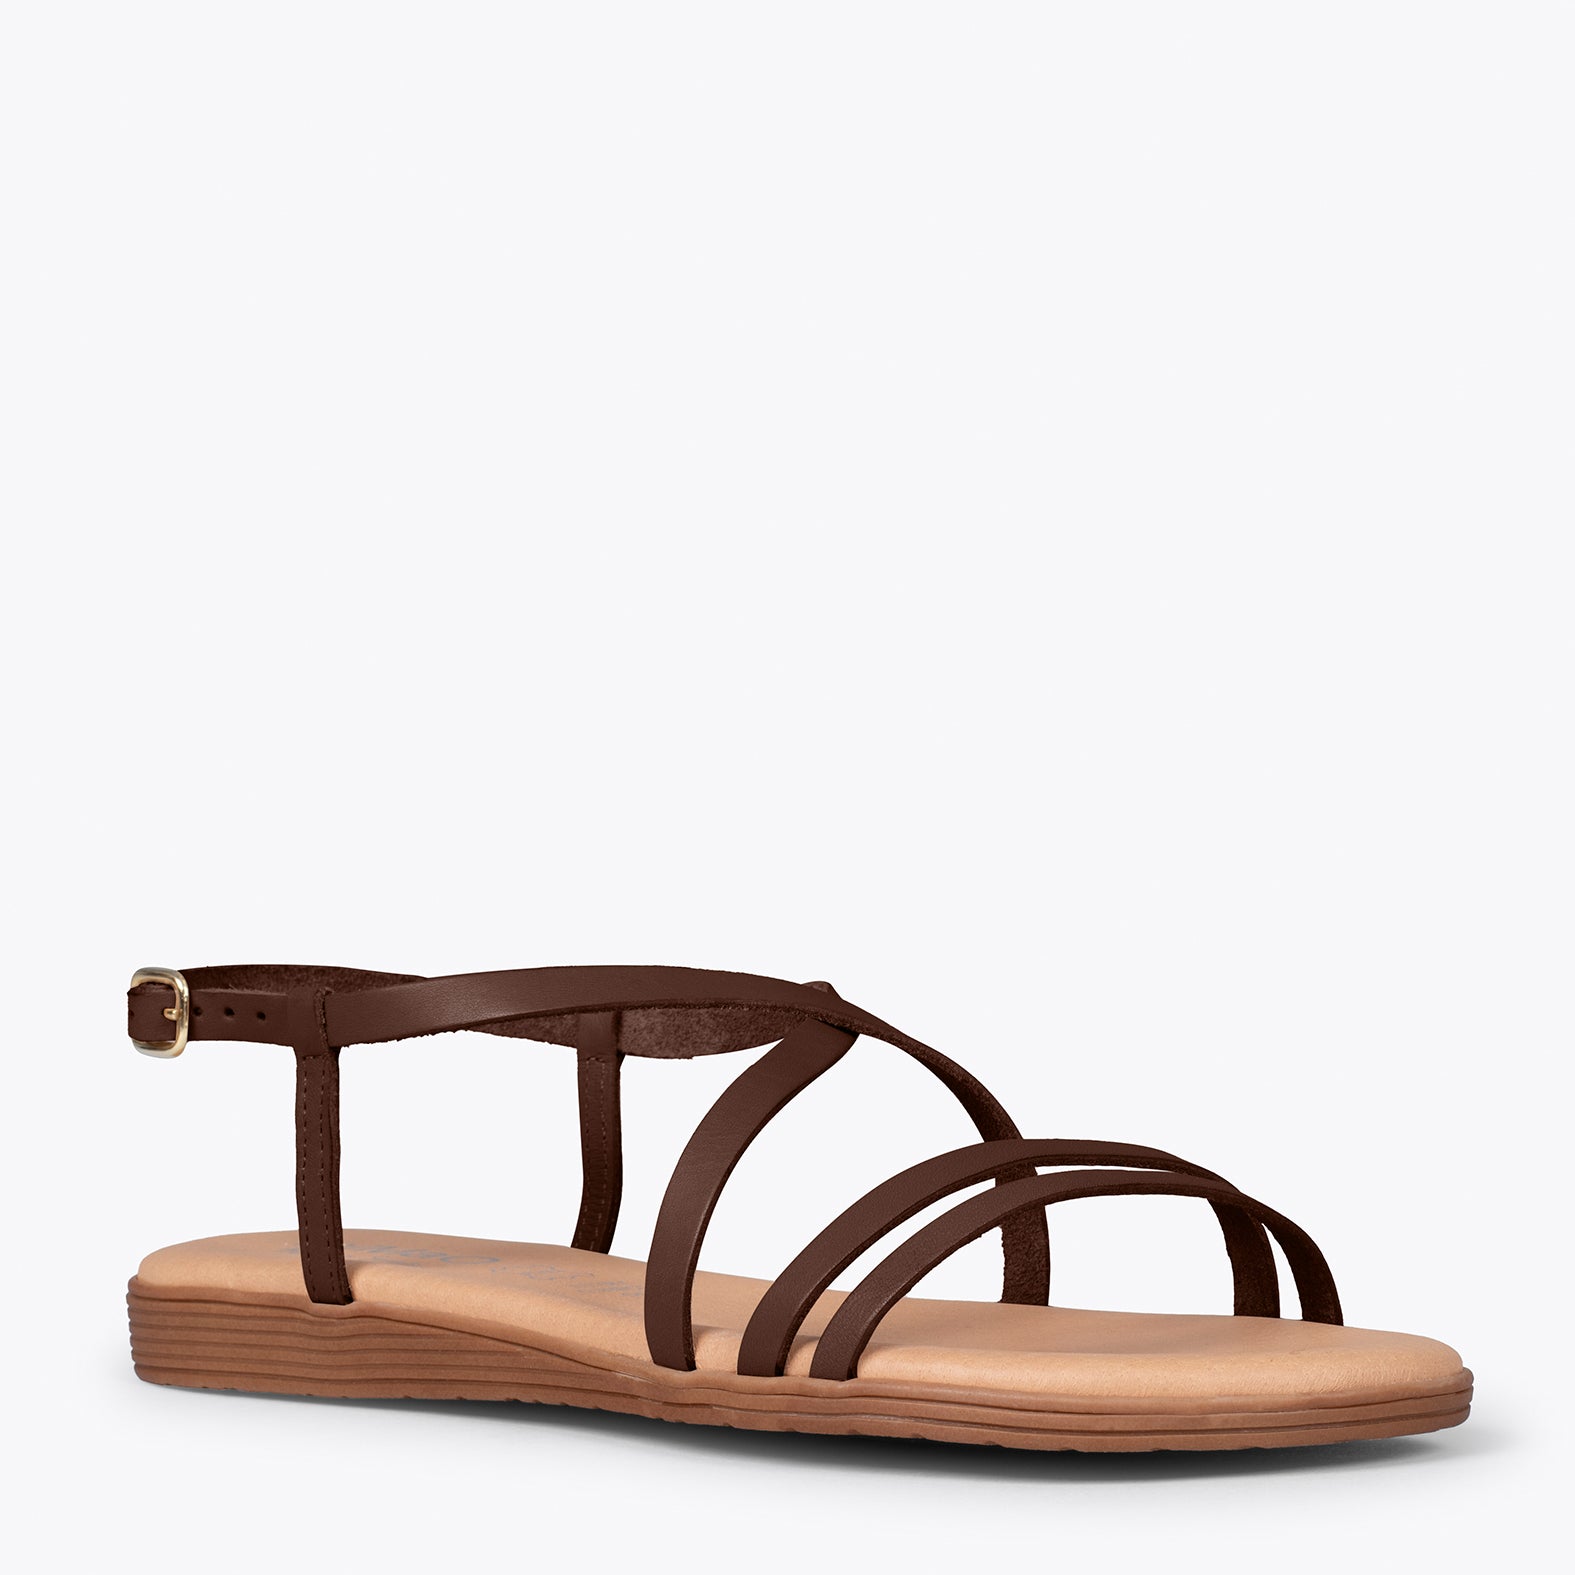 RODES - BROWN flat sandals with straps